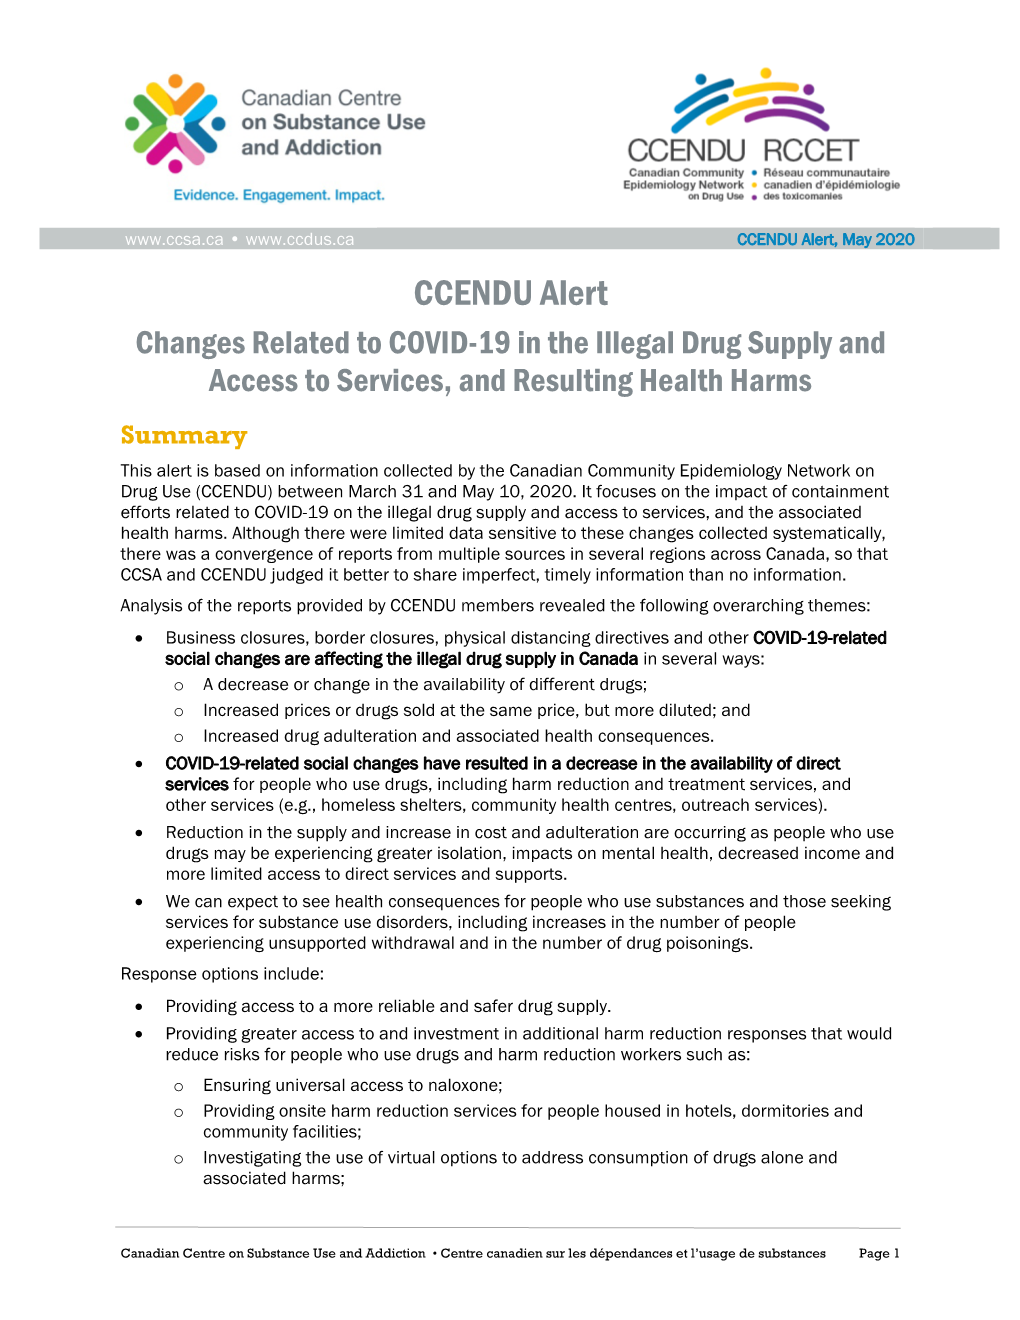 CCENDU Alert: Changes Related to COVID-19 in the Illegal Drug Supply and Access to Services, and Resulting Health Harms